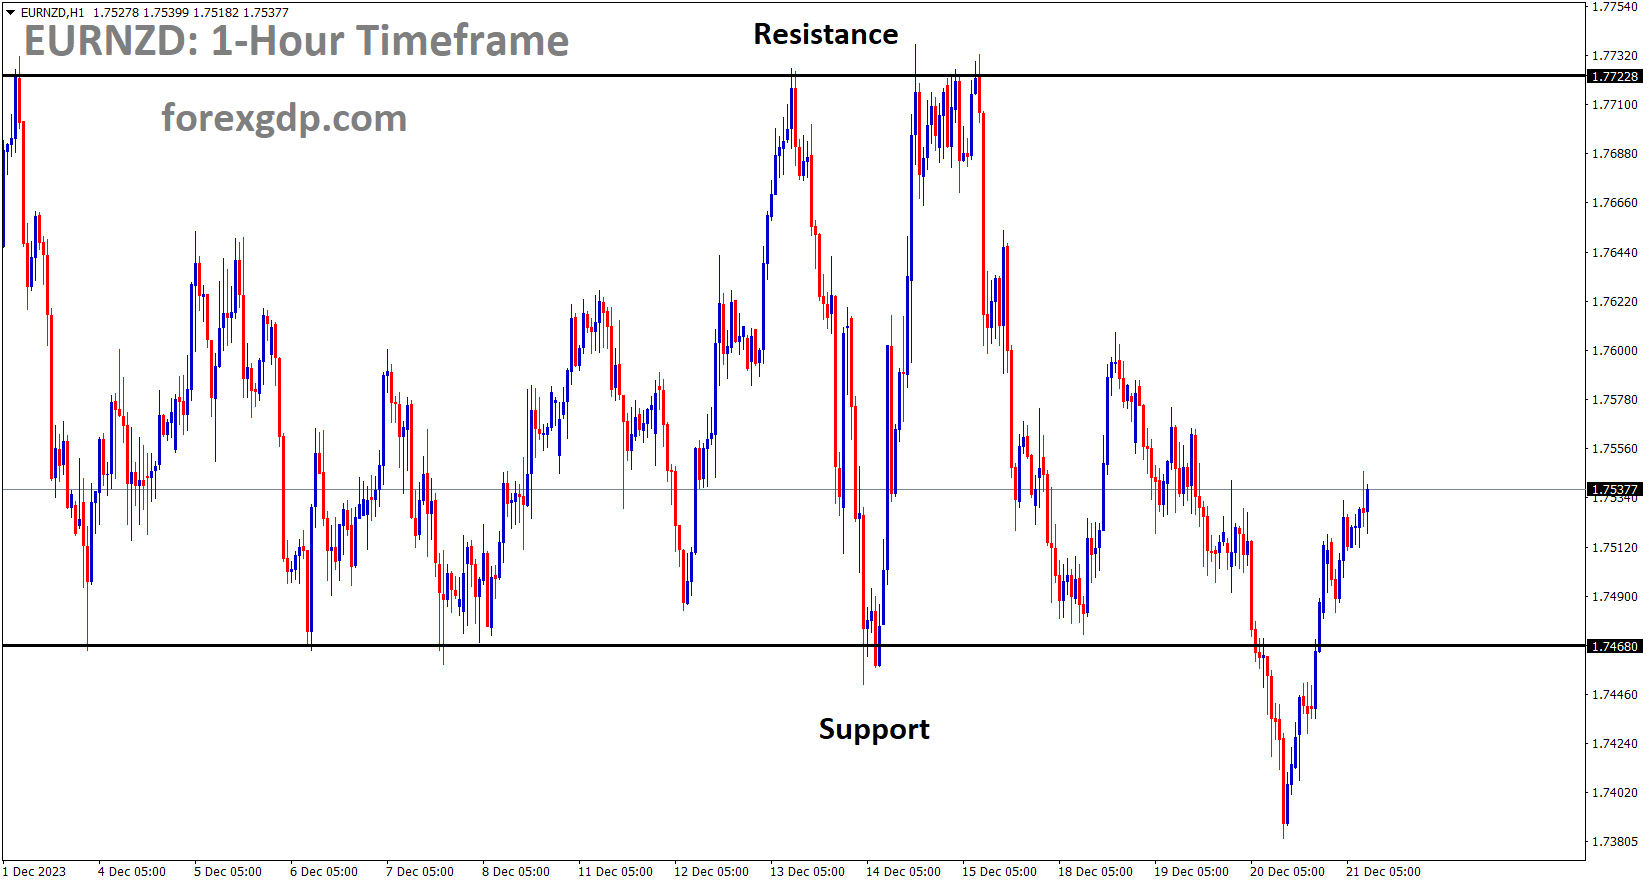 EURNZD is moving in the Box pattern and the market has rebounded from the support area of the pattern